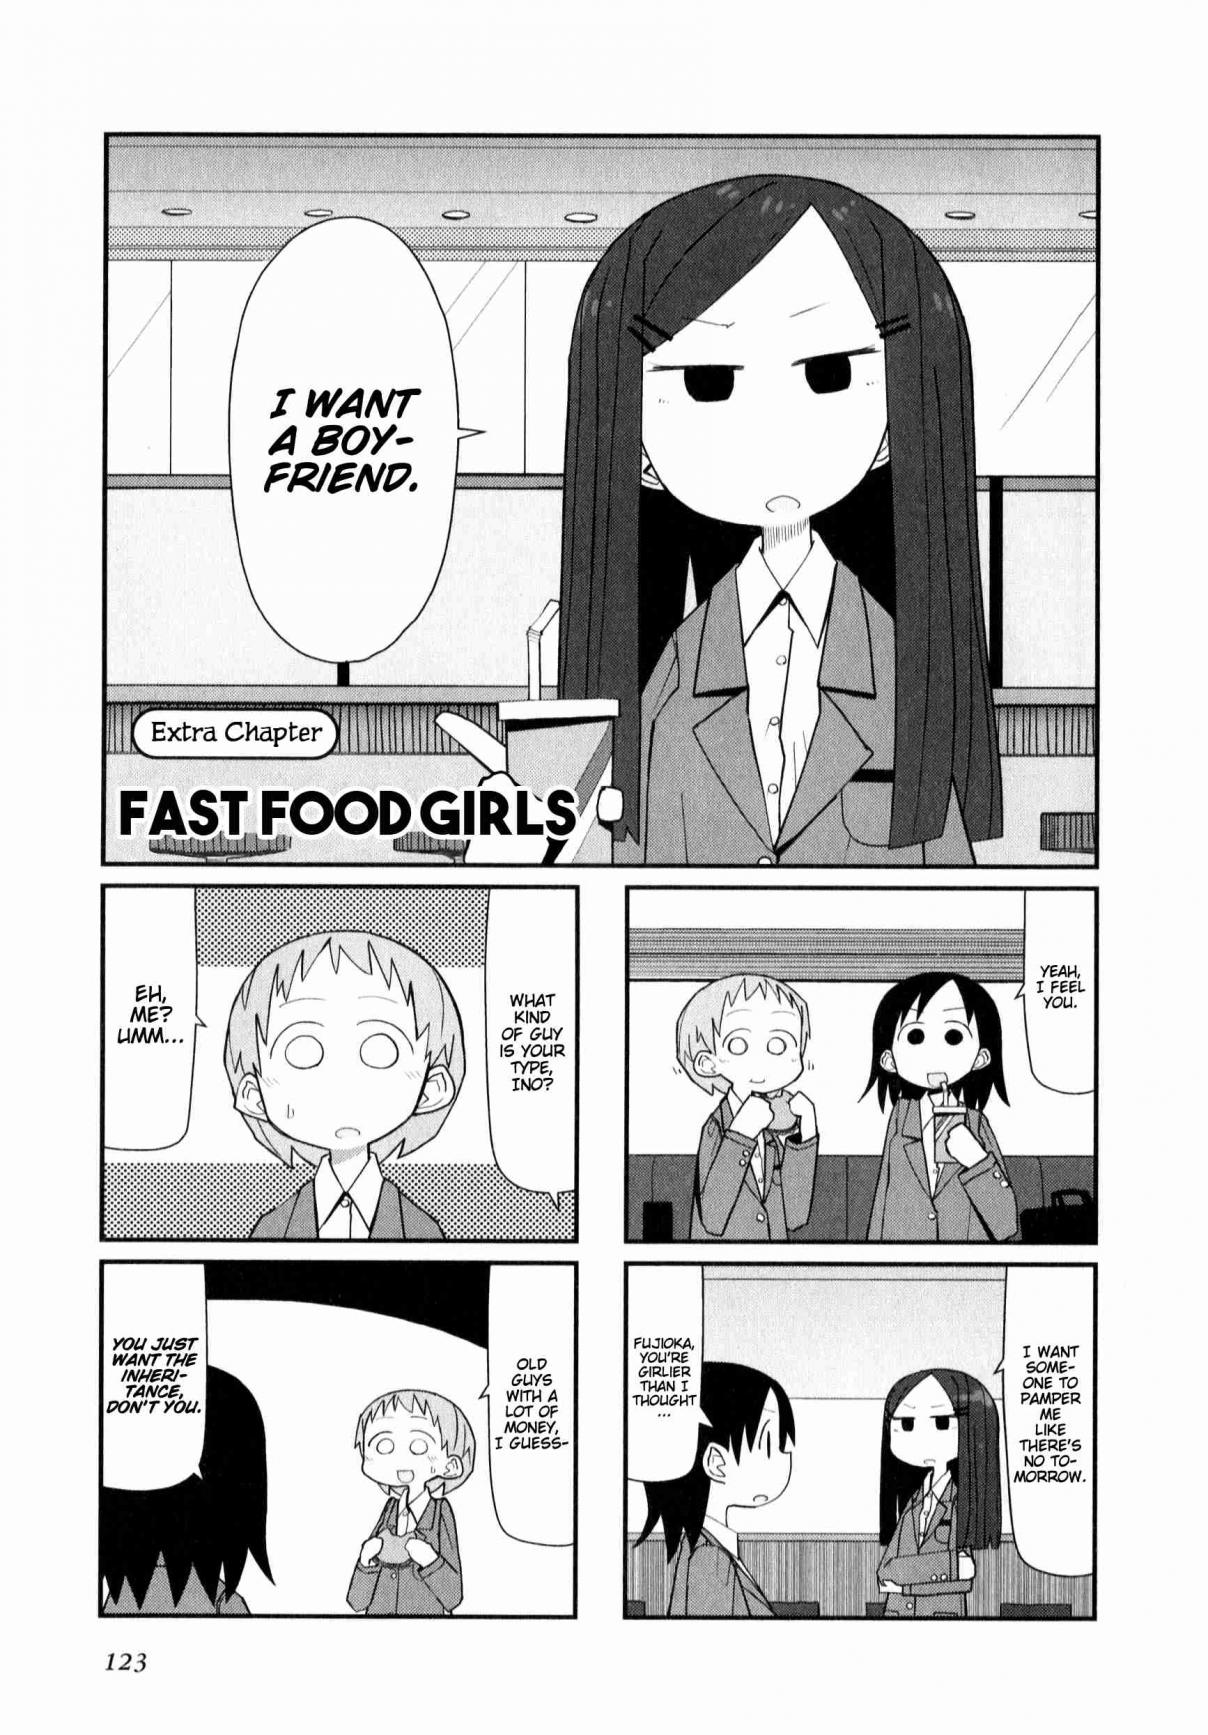 Biotop Vol. 1 Ch. 17.5 Extra Chapter Fast Food Girls